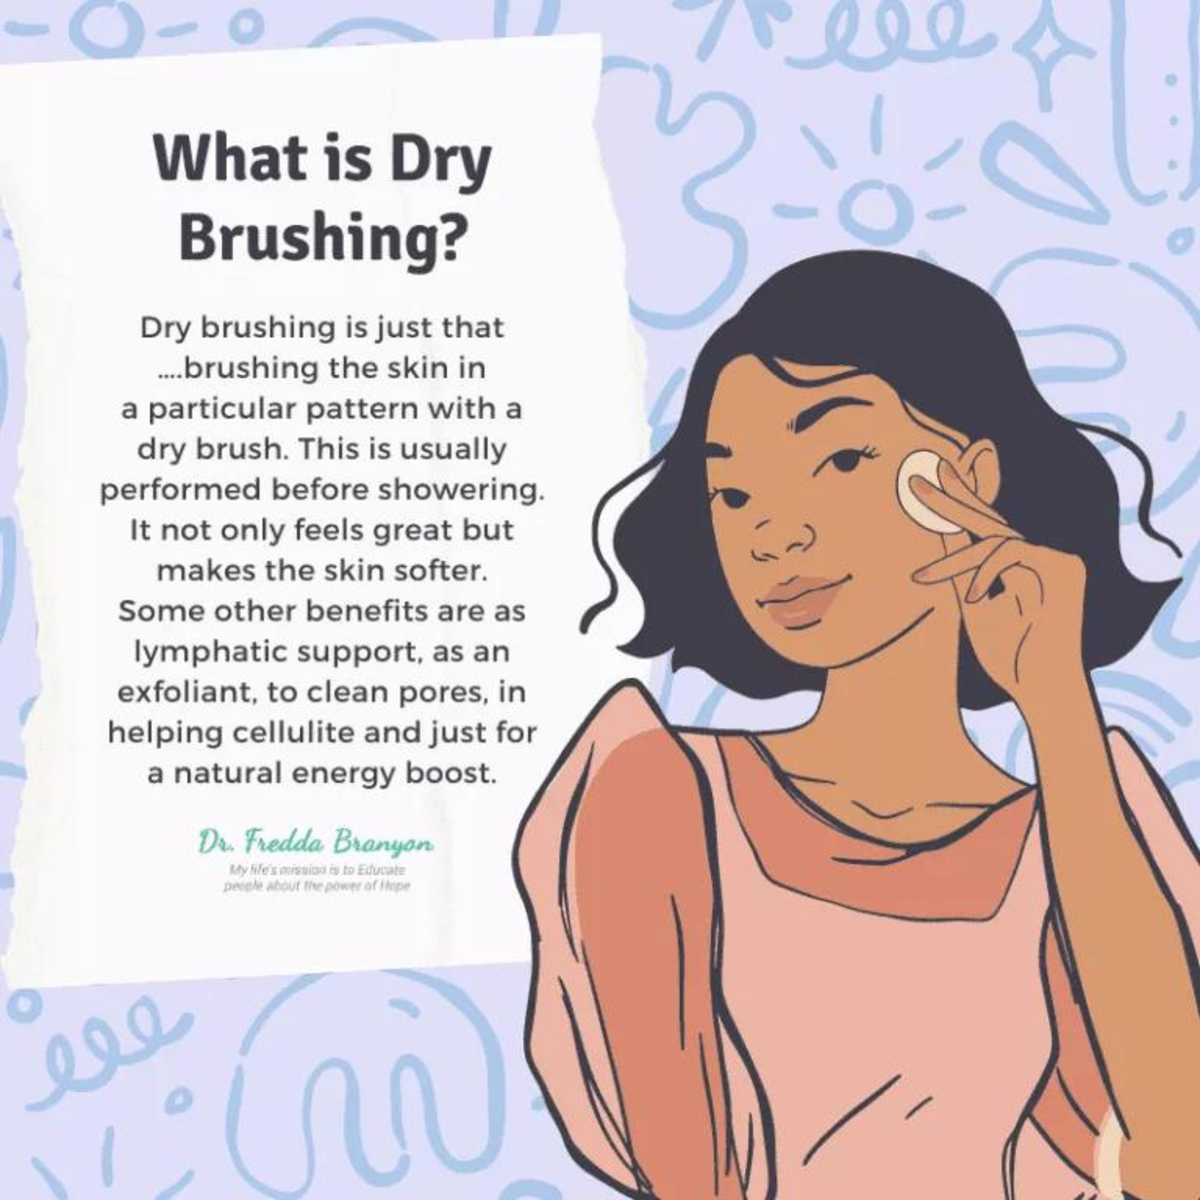 How to Dry Brush Your Body: The Benefits & Steps for Healthy Skin